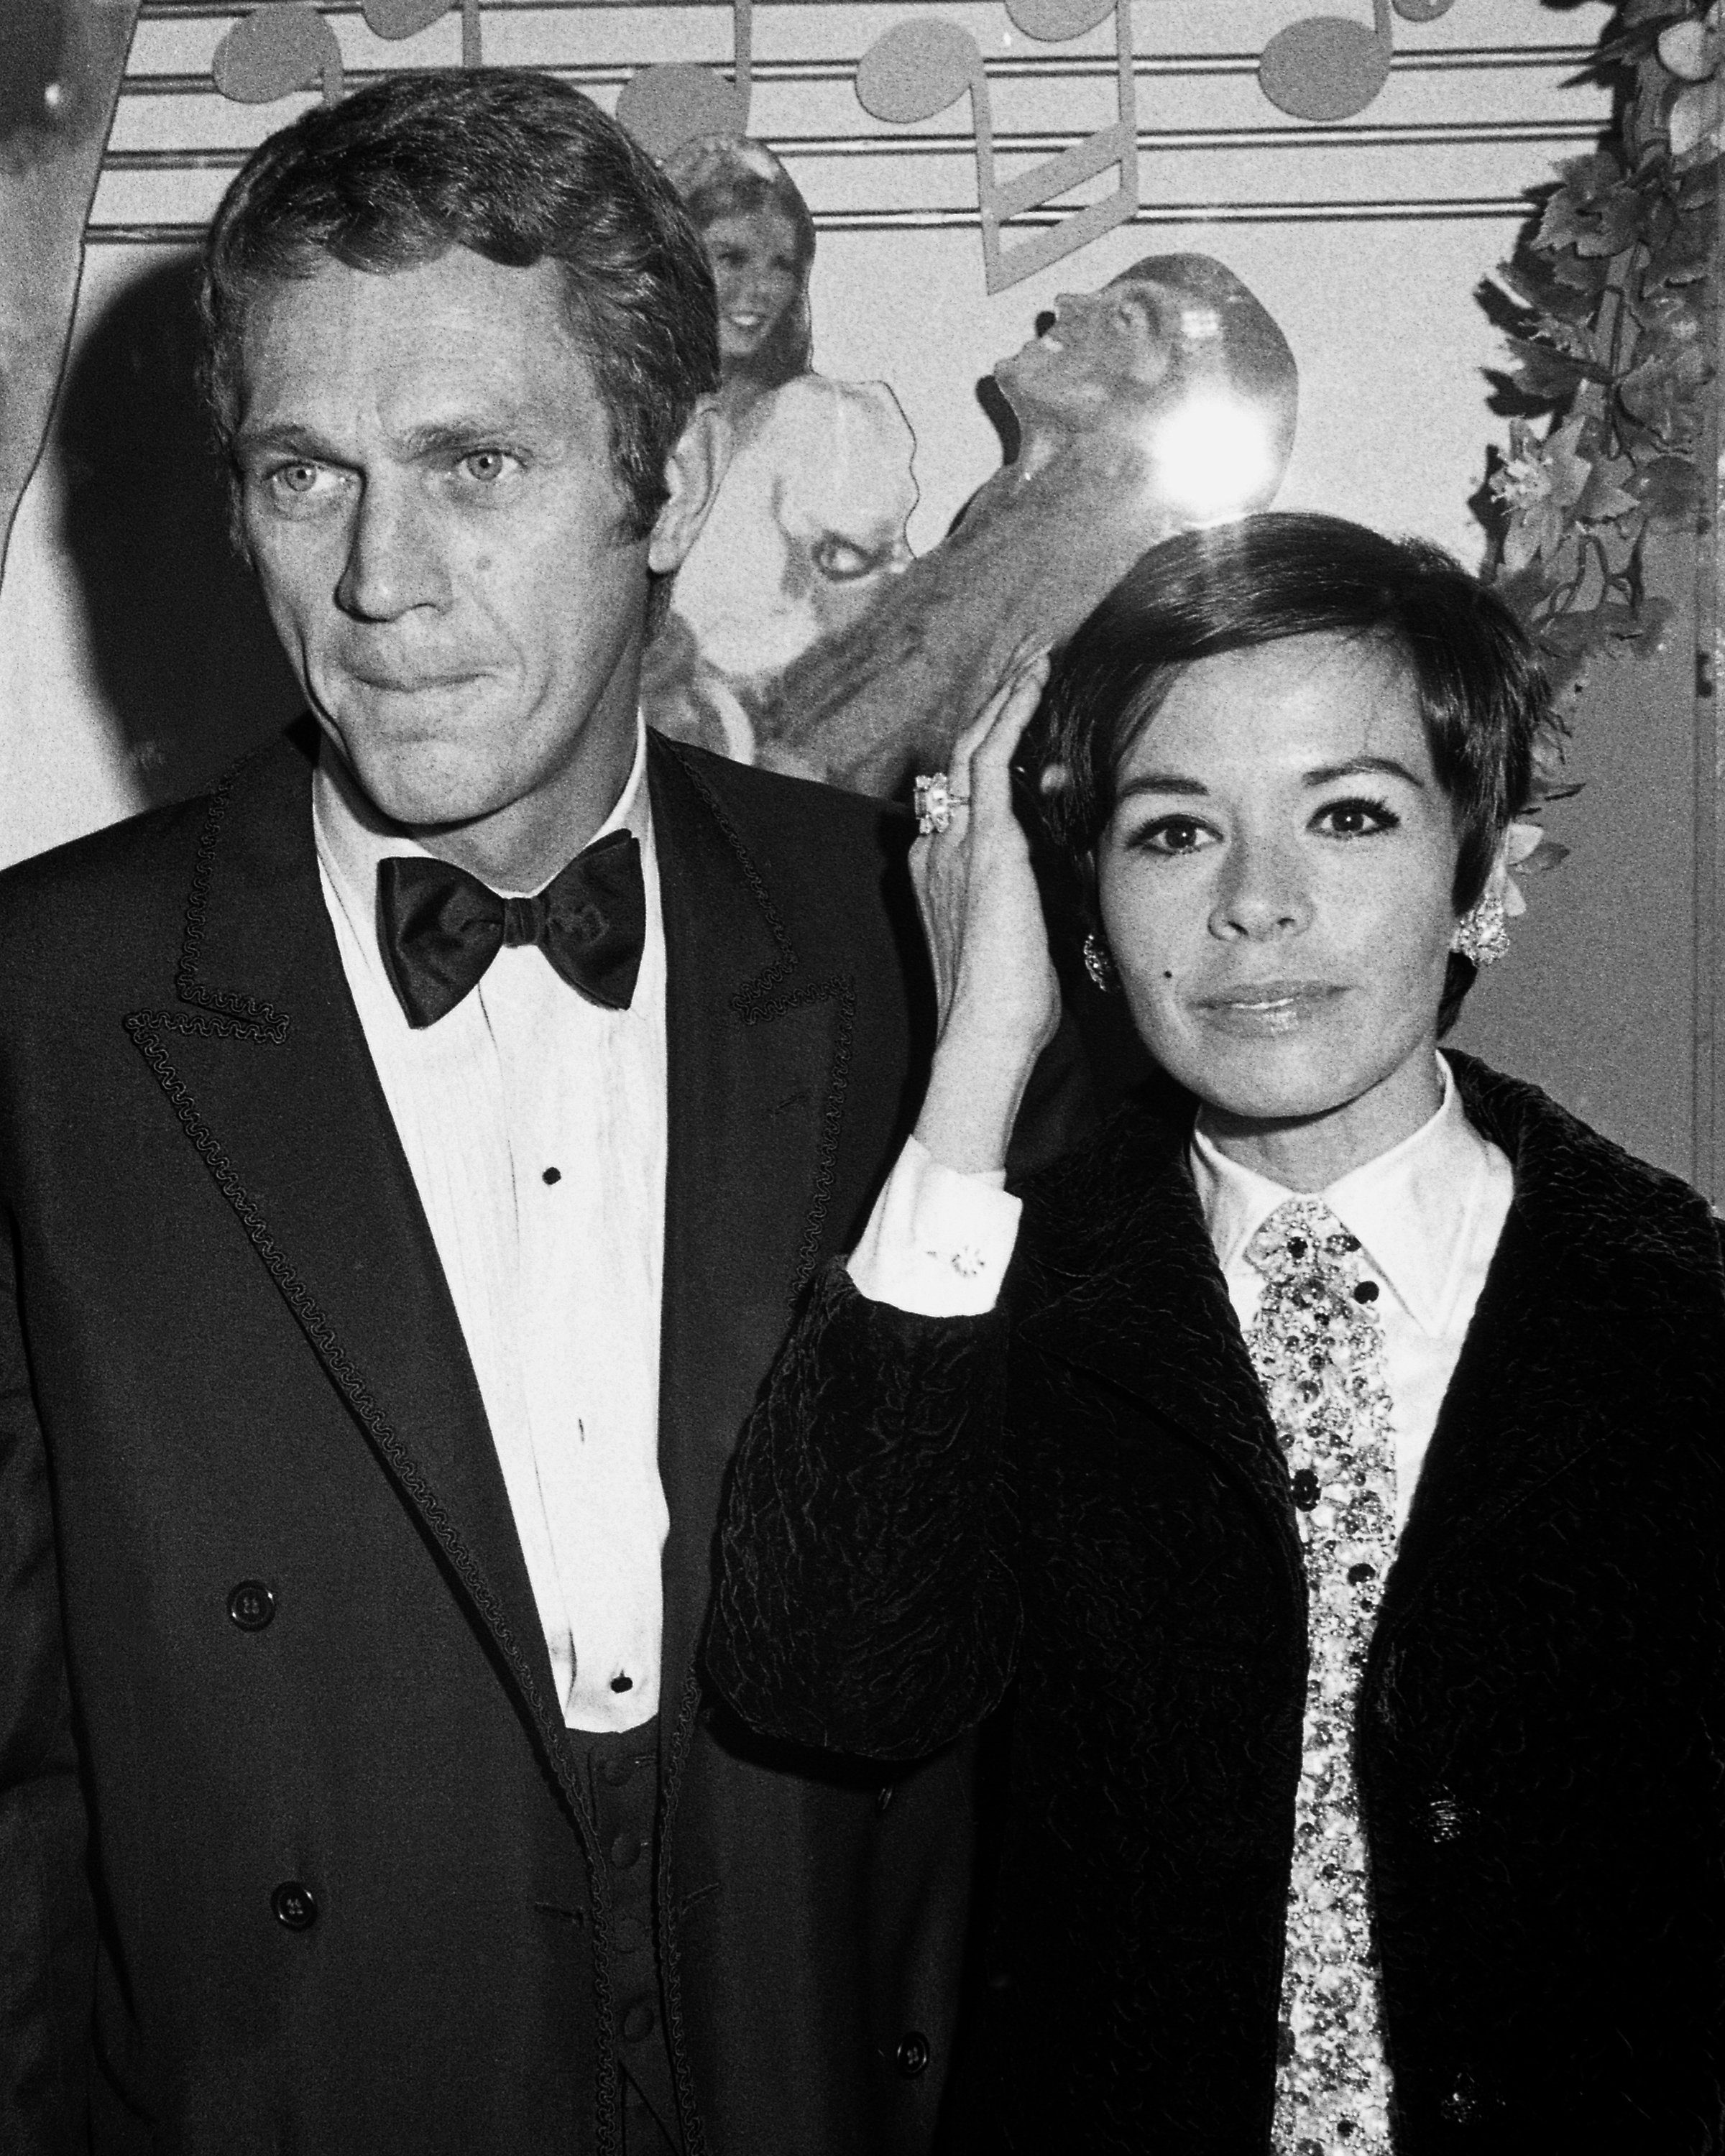 Steve McQueen and Neile Adams attending the premiere of "Doctor Dolittle" at the Paramount Theater on December 21, 1967 in Los Angeles, California┃Source: Getty Images